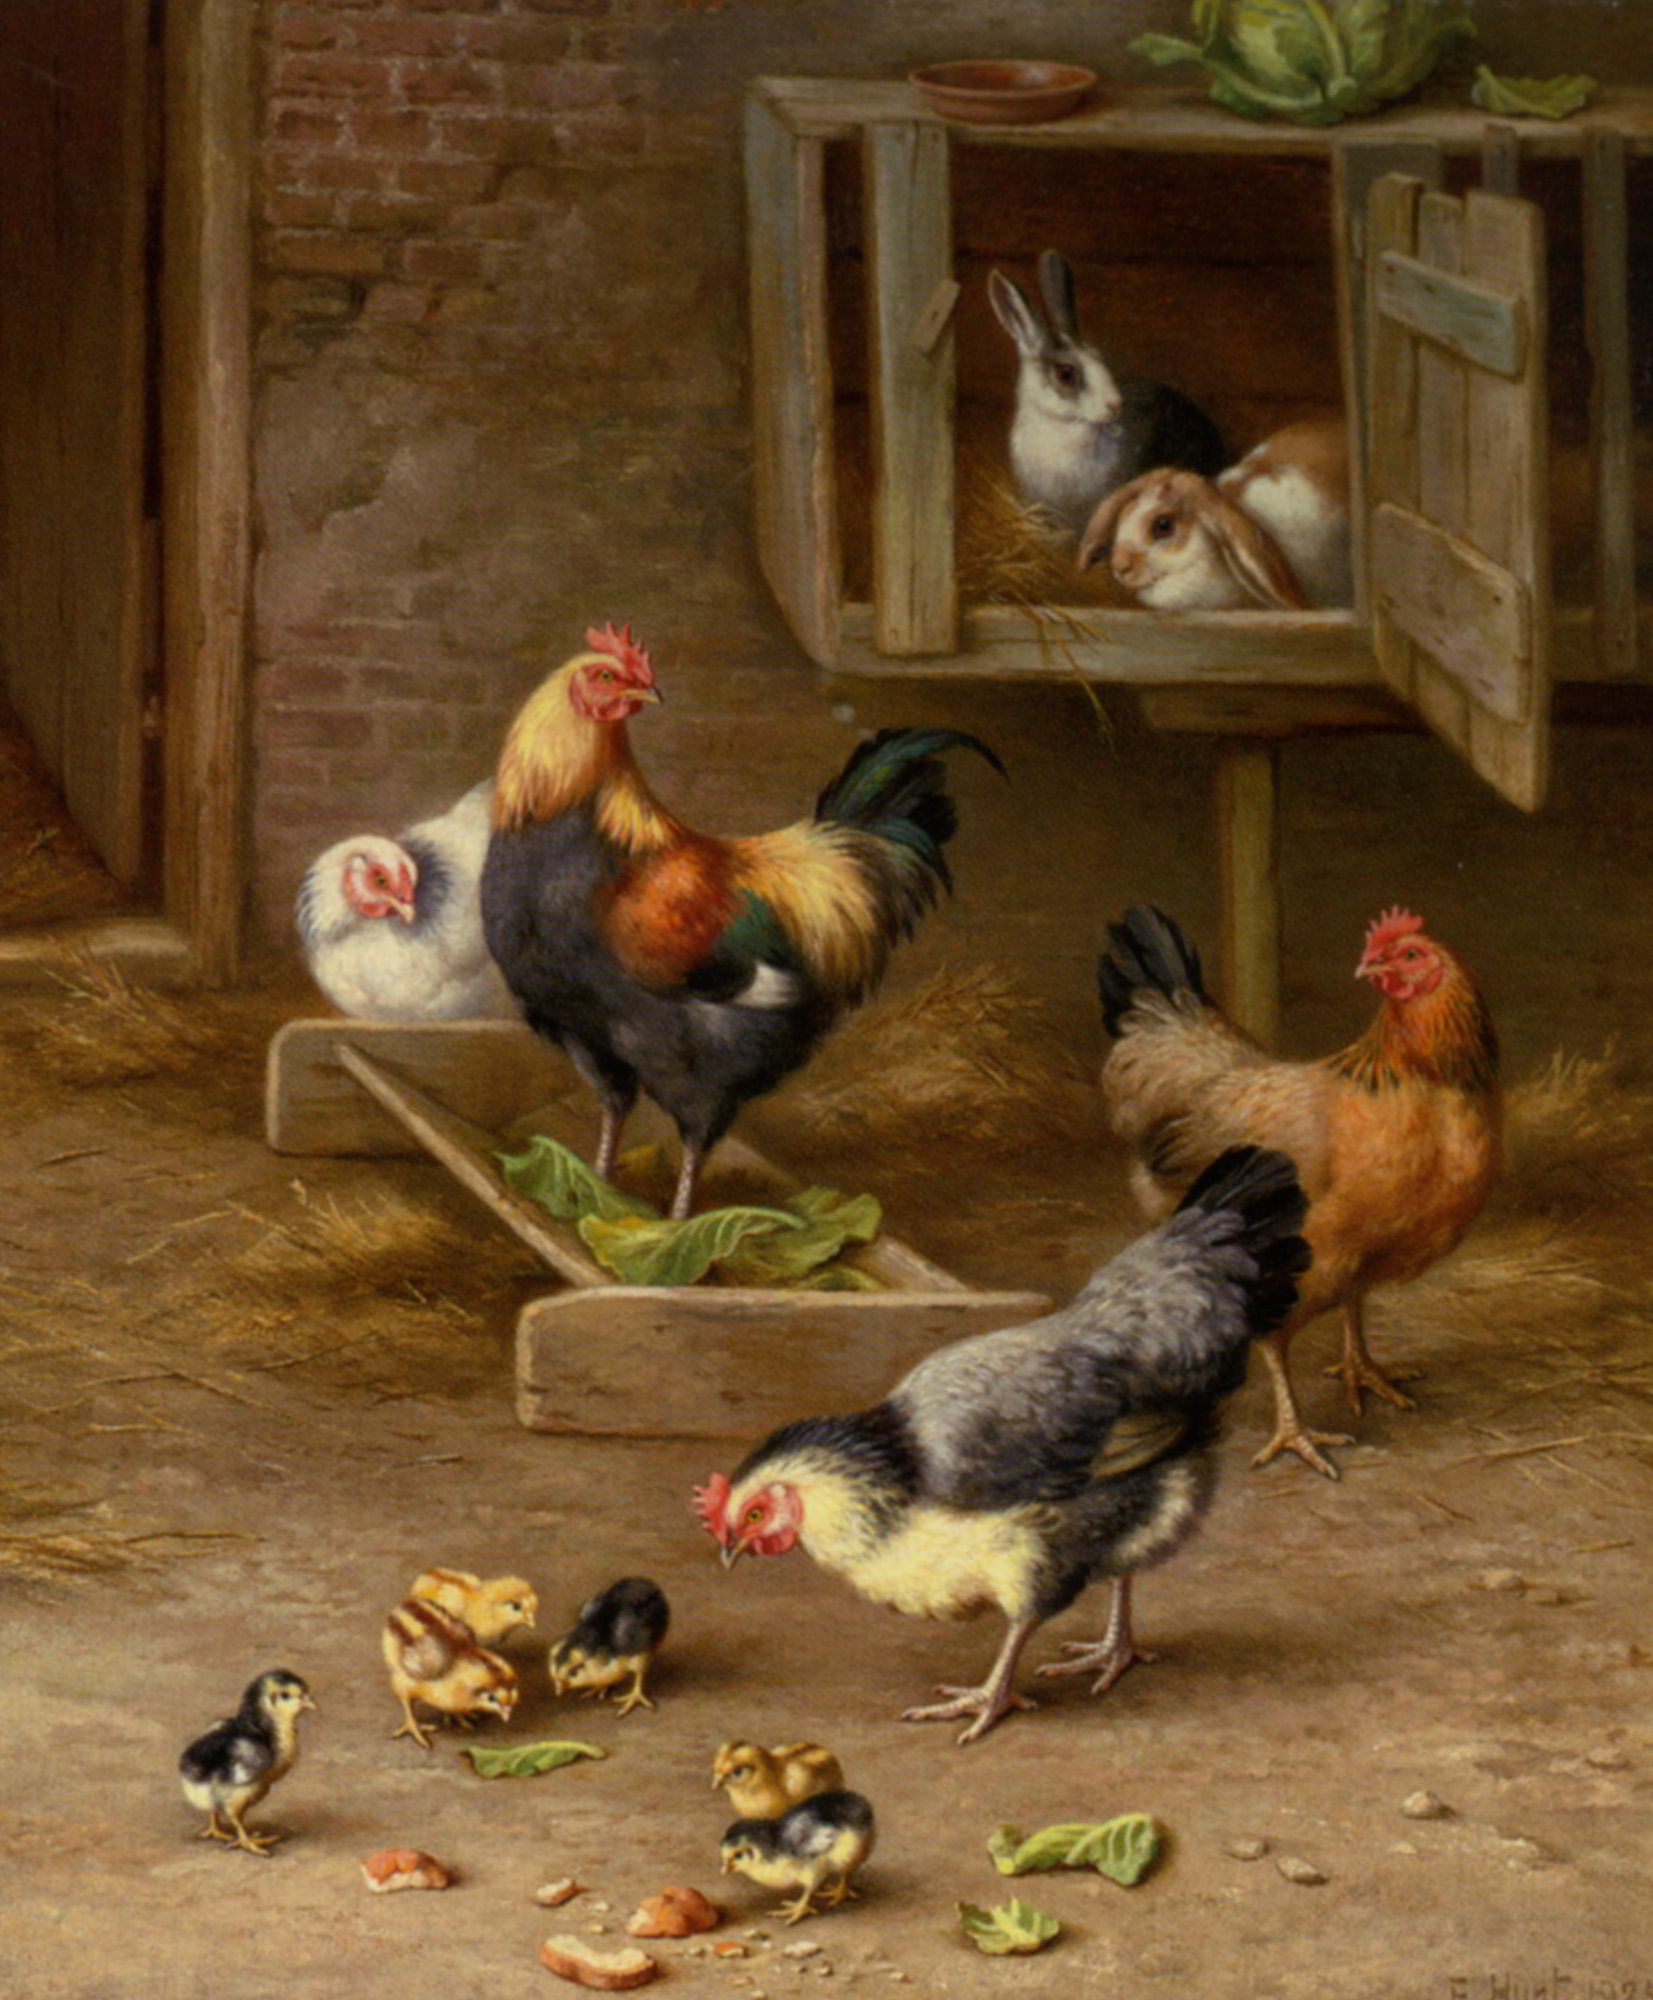 Chickens Chicks and Rabbits in a Hutch by Edgar Hunt